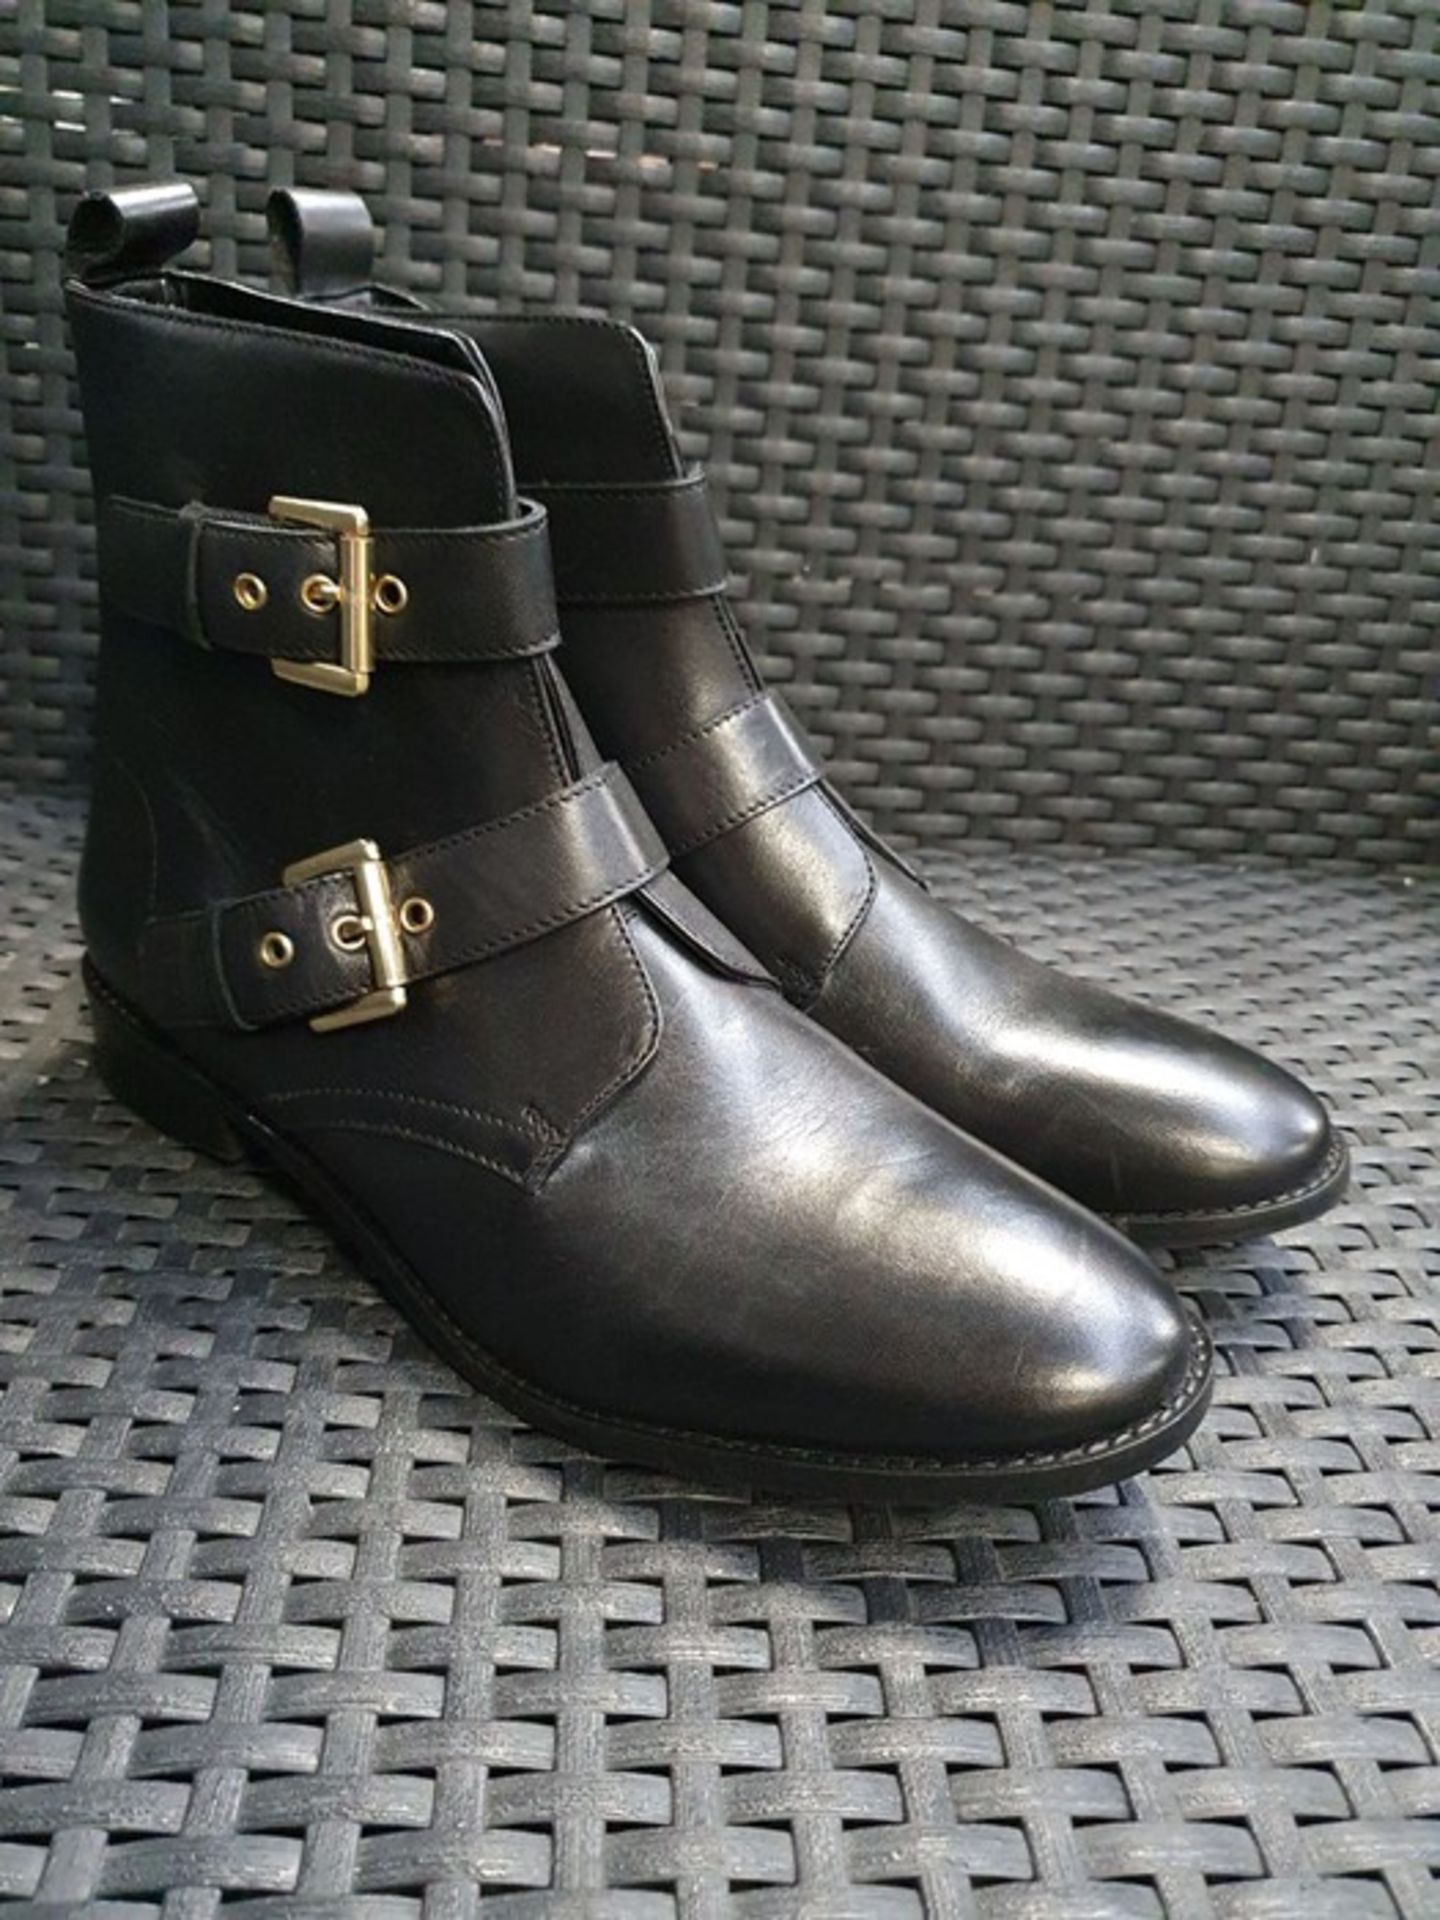 ONE PAIR OF LA REDOUTE COLLECTIONS LEATHER ANKLE BOOTS WITH BUCKLE DETAIL IN BLACK - SIZE UK 8.